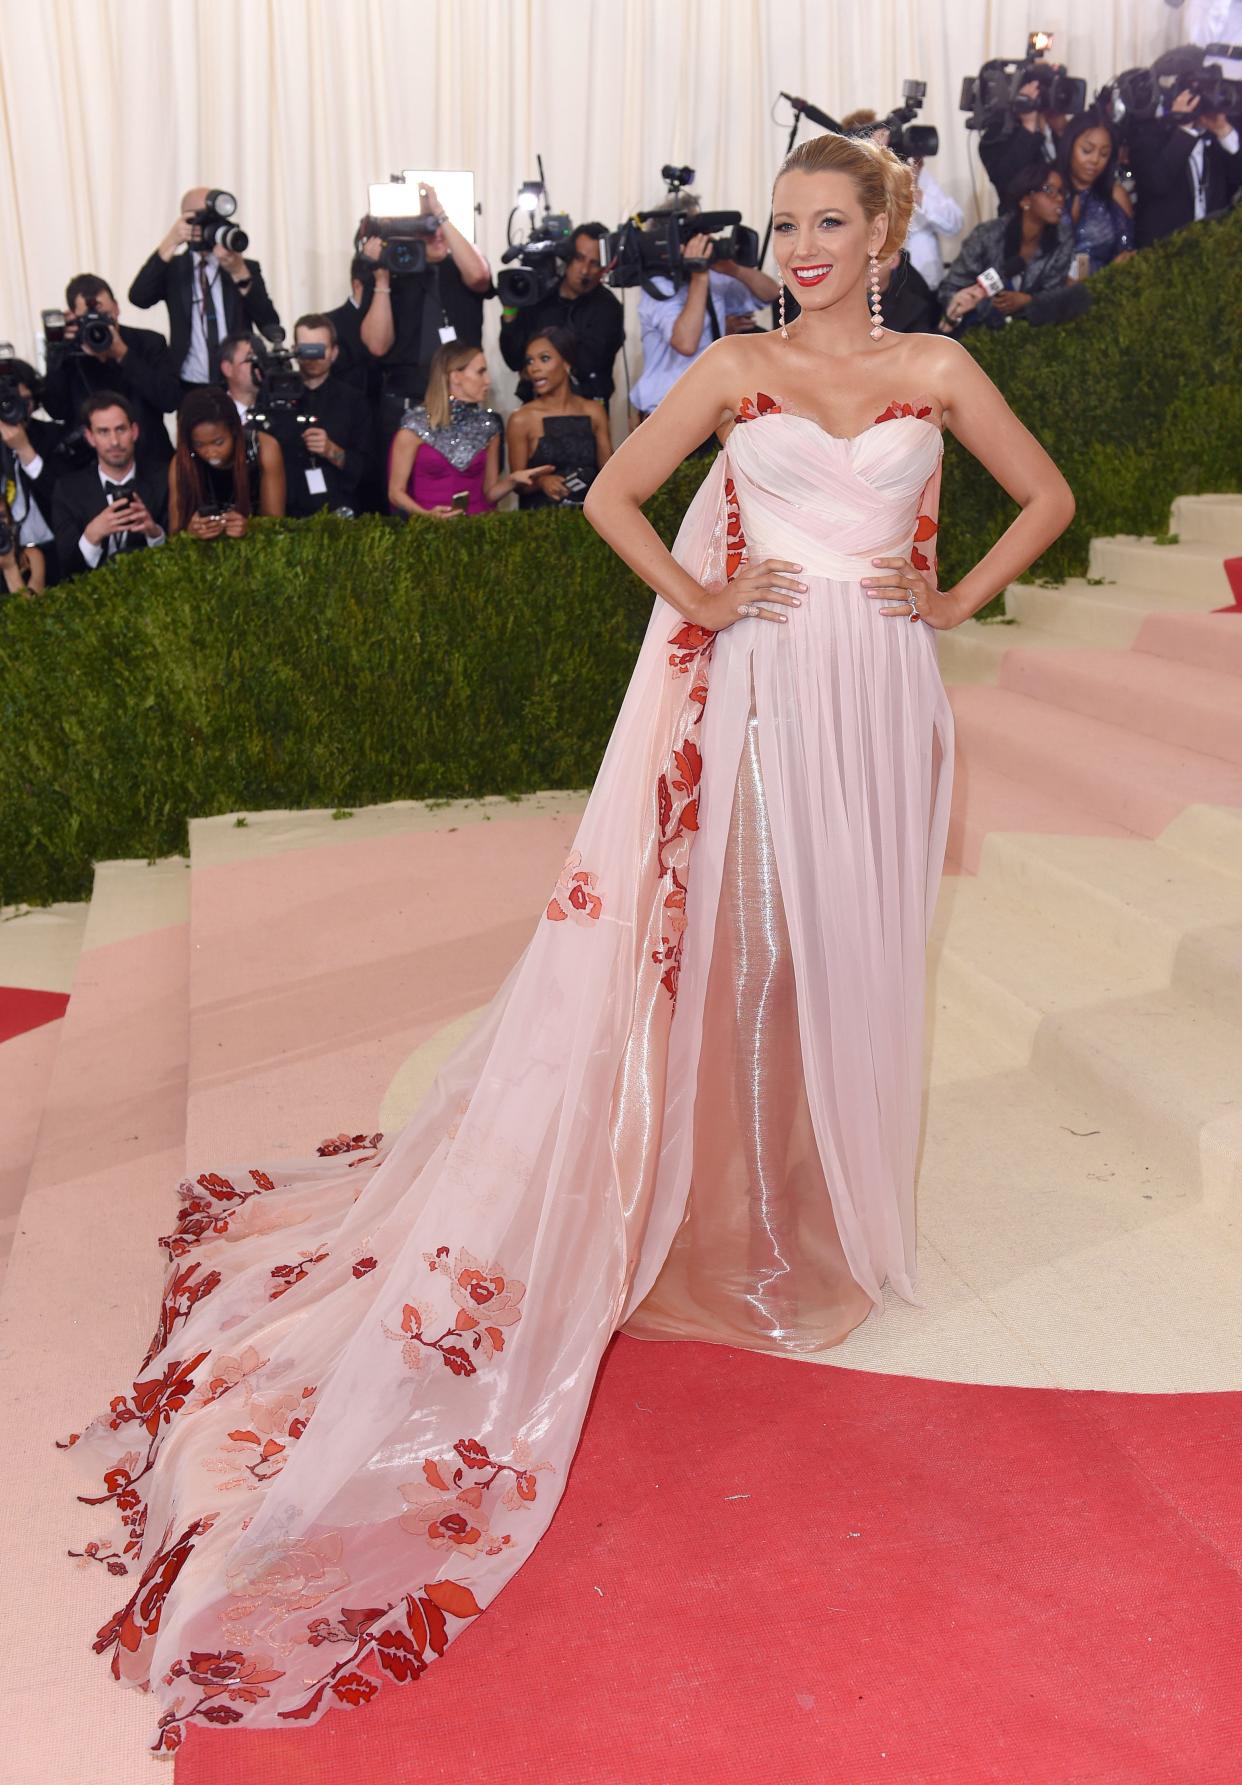 Blake Lively at the 2016 Met Gala in a pink gown with a cape with red details on it.